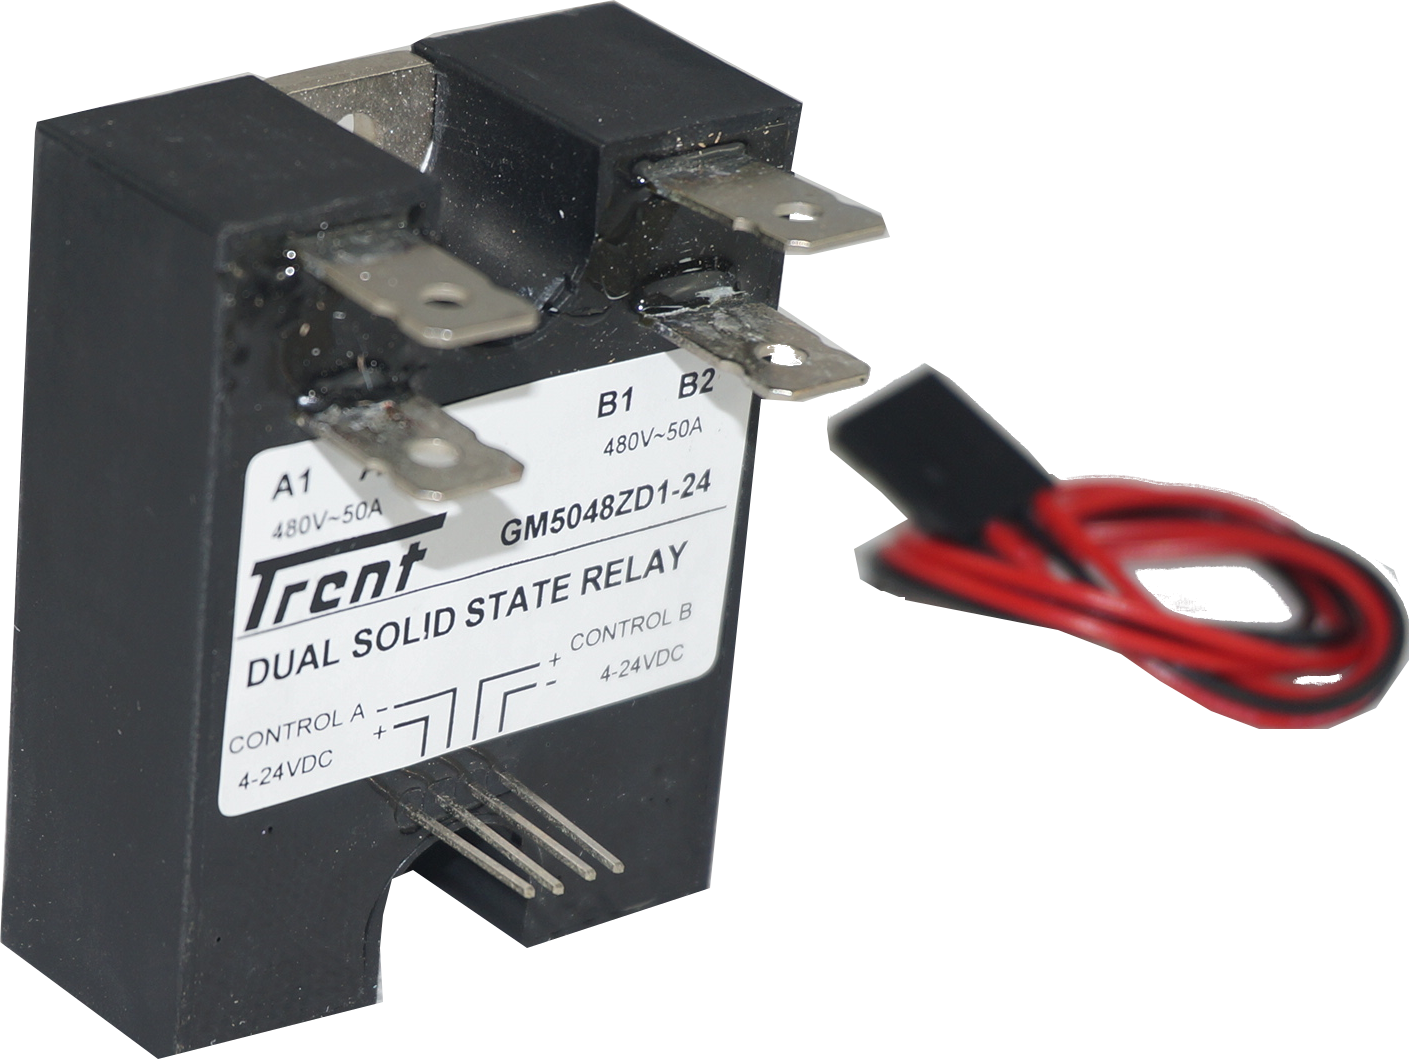 GM5048ZD1-24 DUAL, Dual Solid State Relay, Two Pole 15-32VDC Control, 2 x 50A, 48-480VAC Load